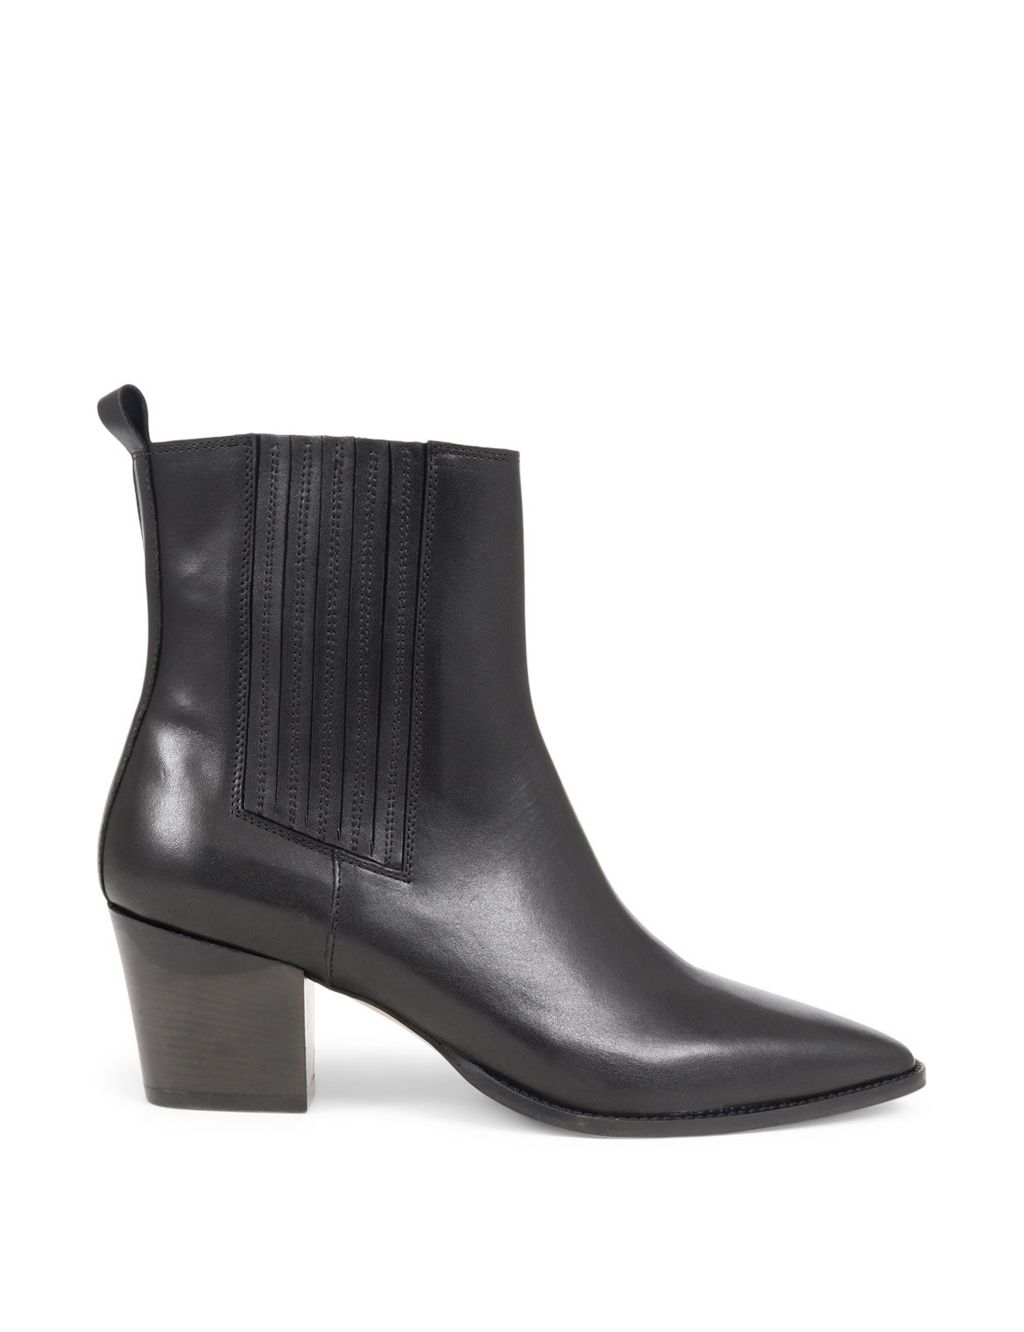 Leather Block Heel Pointed Ankle Boots image 2